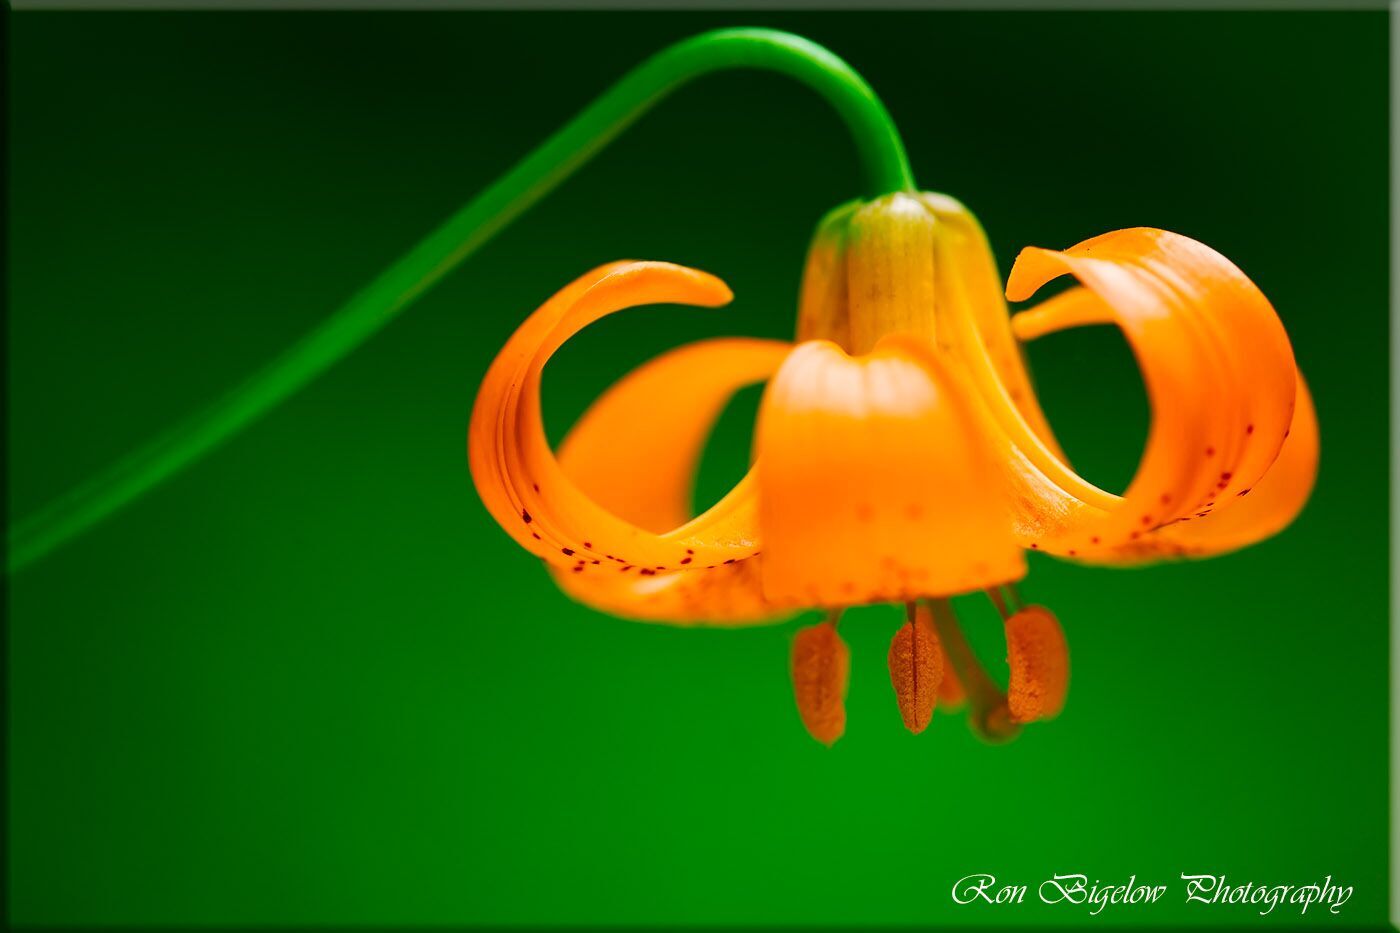 Ron Bigelow Photography - Tiger Lily